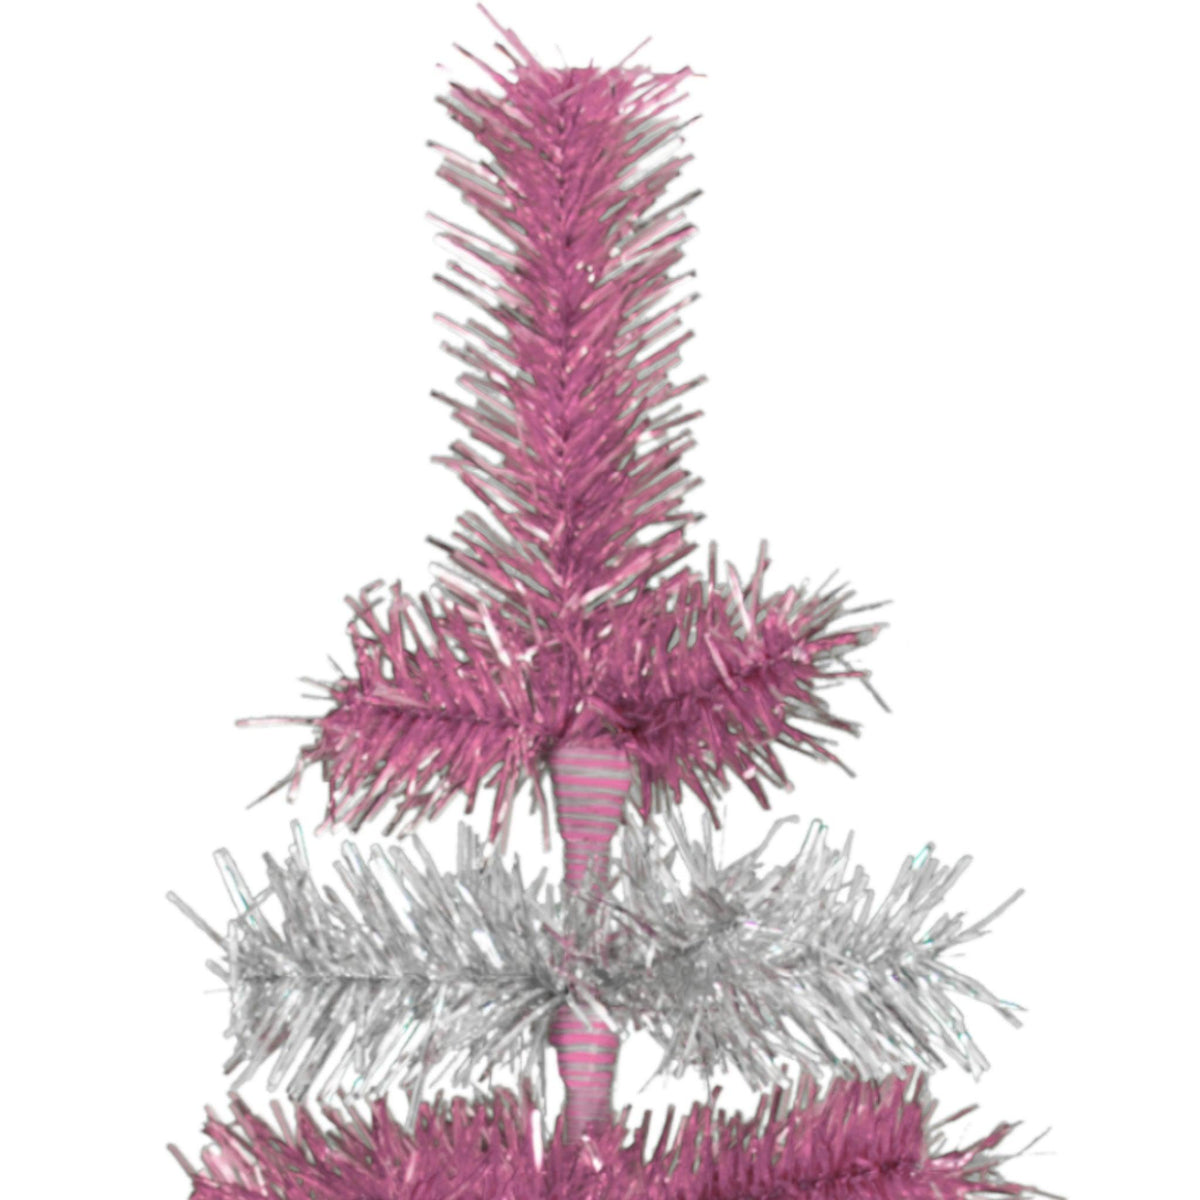 Pink & Silver Layered Tinsel Christmas Trees made by hand in the USA on sale at leedisplay.com